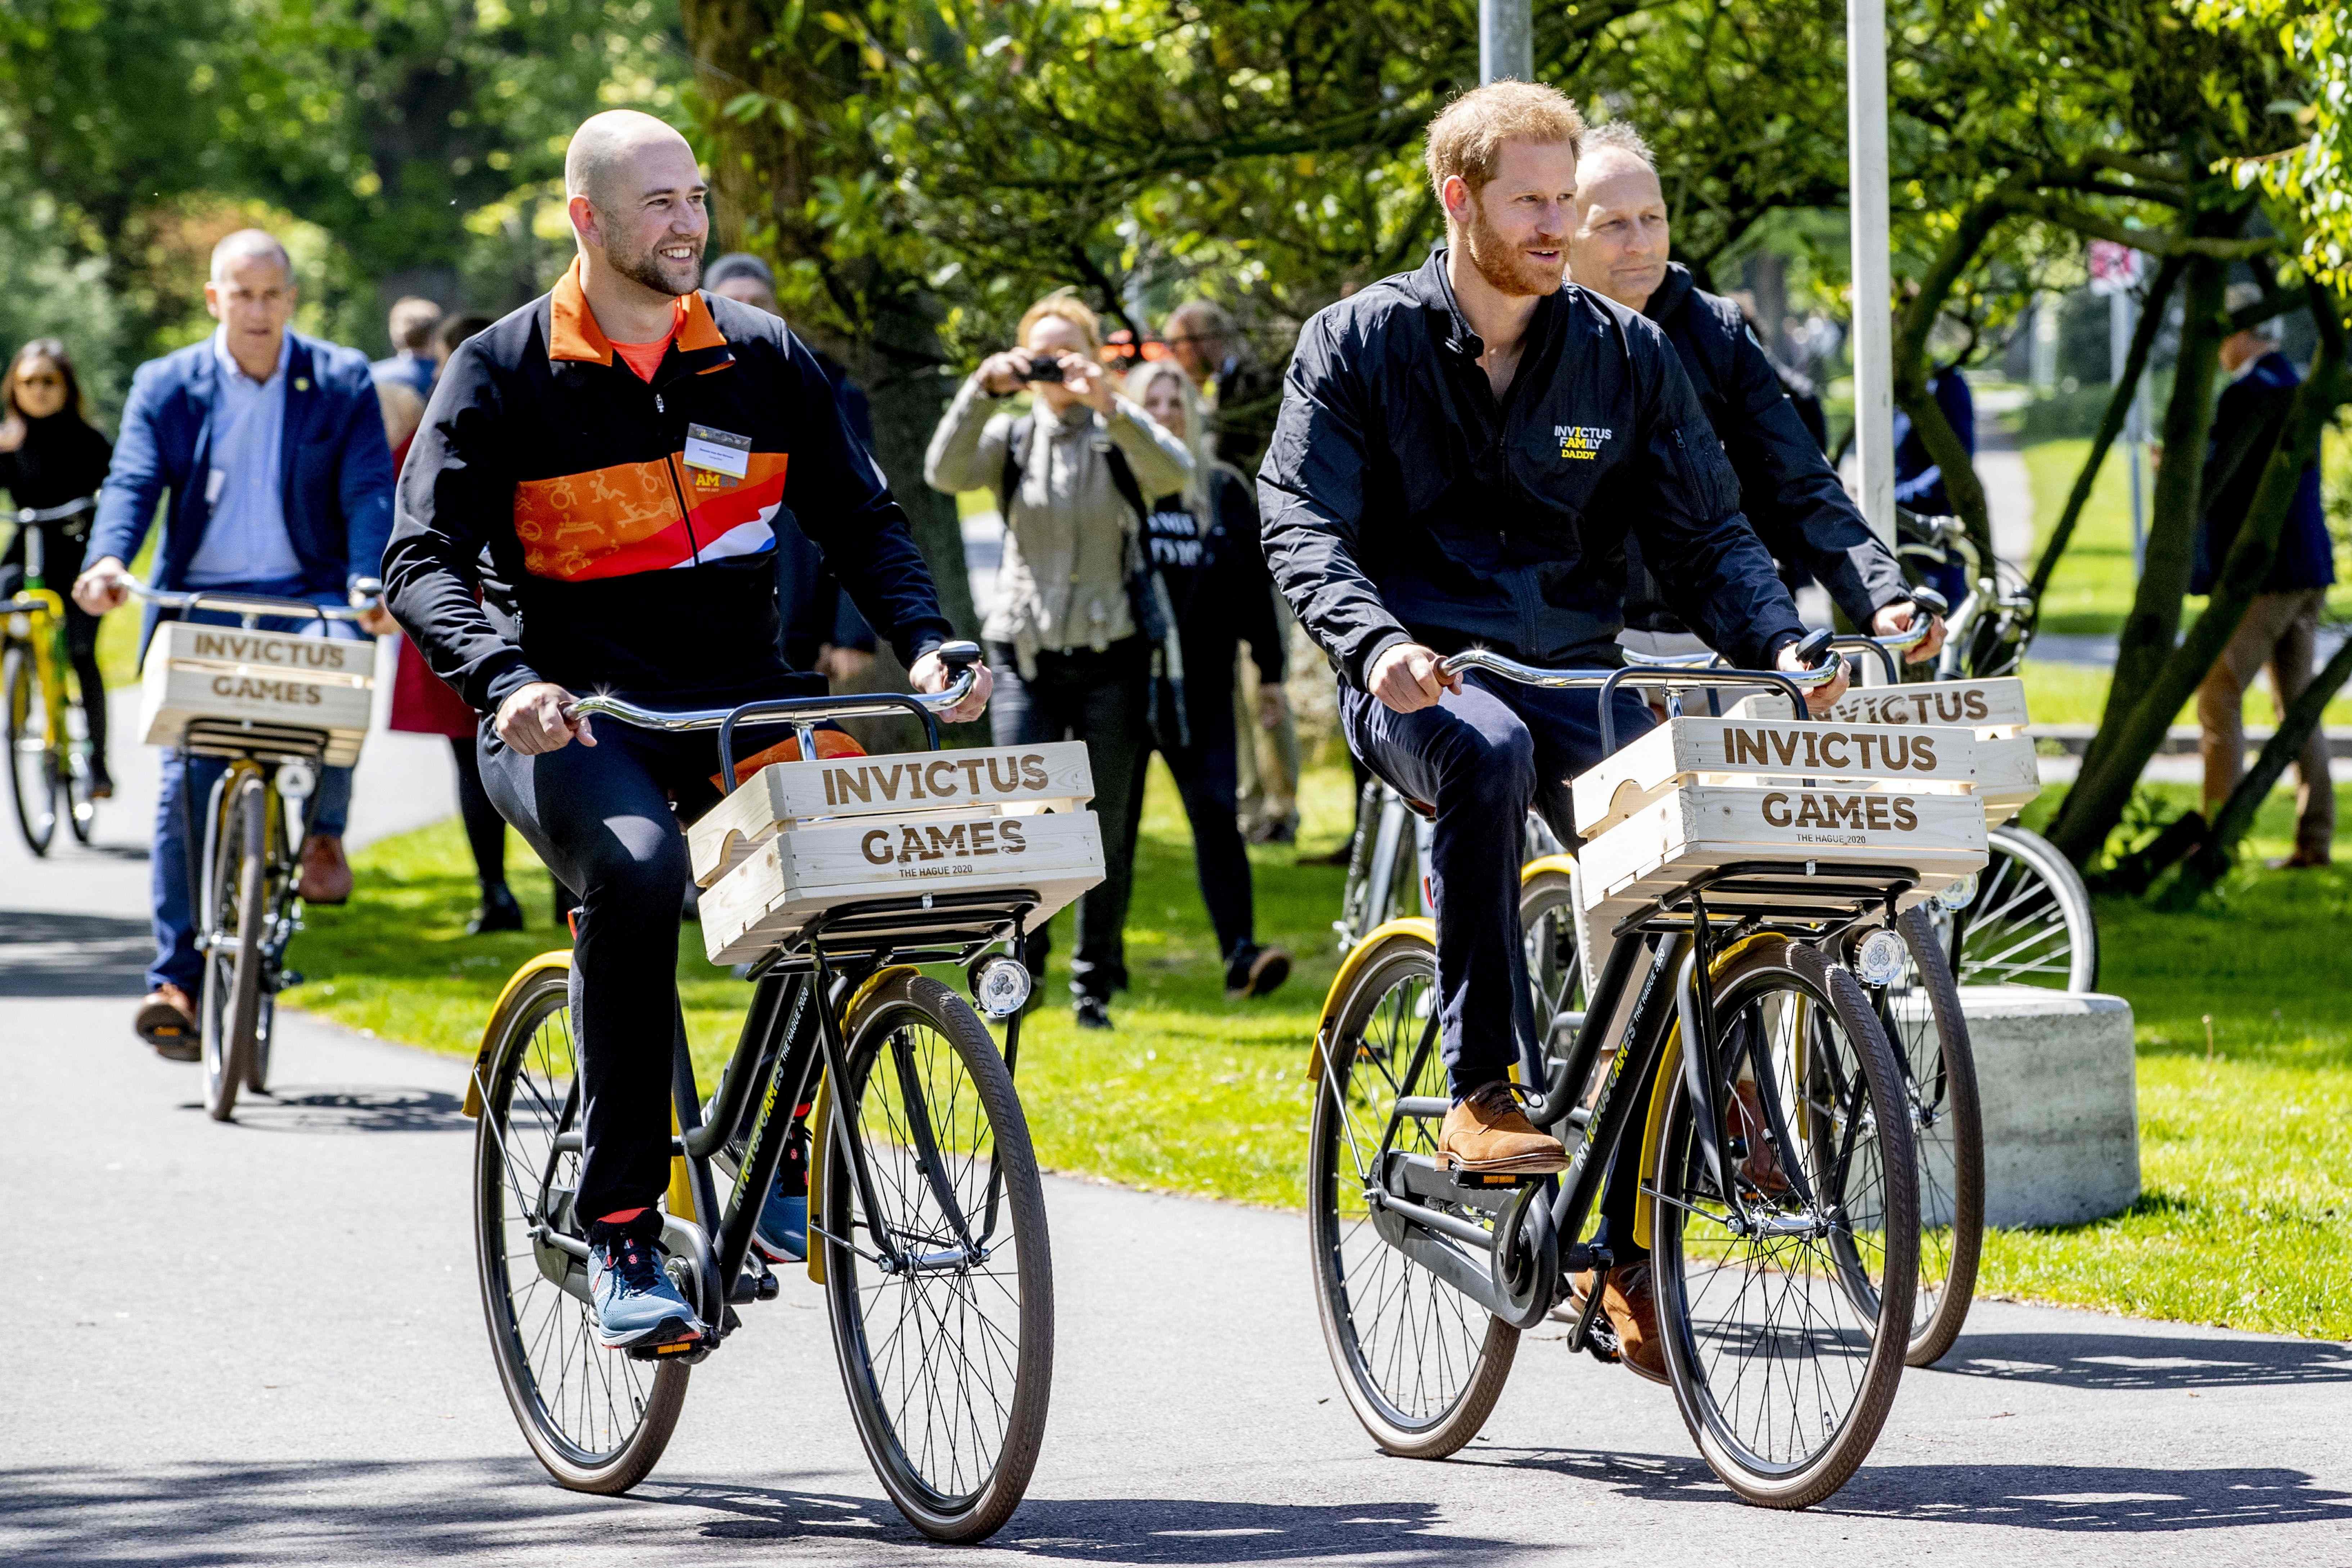 Former Dutch serviceman and athlete Dennis Van Der Stroom (L) and Prince Harry (R) ride a bike during the presentation of the Invictus Games The Hague 2020, in The Hague, Netherlands, on May 9, 2019. - The fifth Invictus Games The Hague 2020, an international sporting event for wounded, injured and sick servicepersonnel, will be held in the Zuiderpark in 2020. (Photo by patrick van katwijk / ANP / AFP) / Netherlands OUT